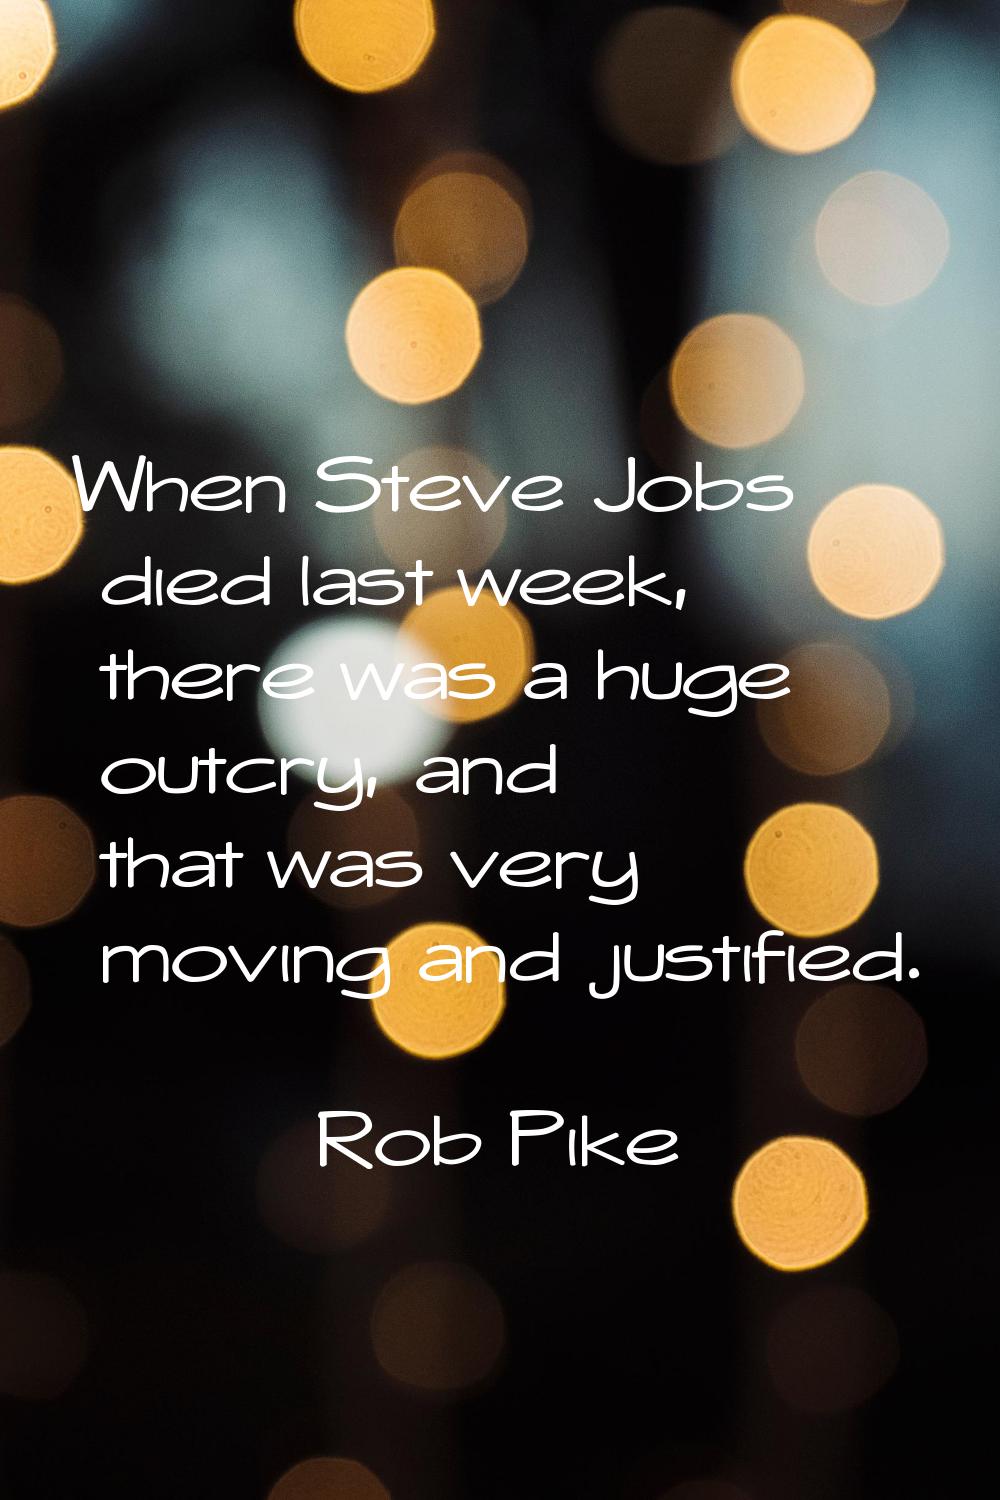 When Steve Jobs died last week, there was a huge outcry, and that was very moving and justified.